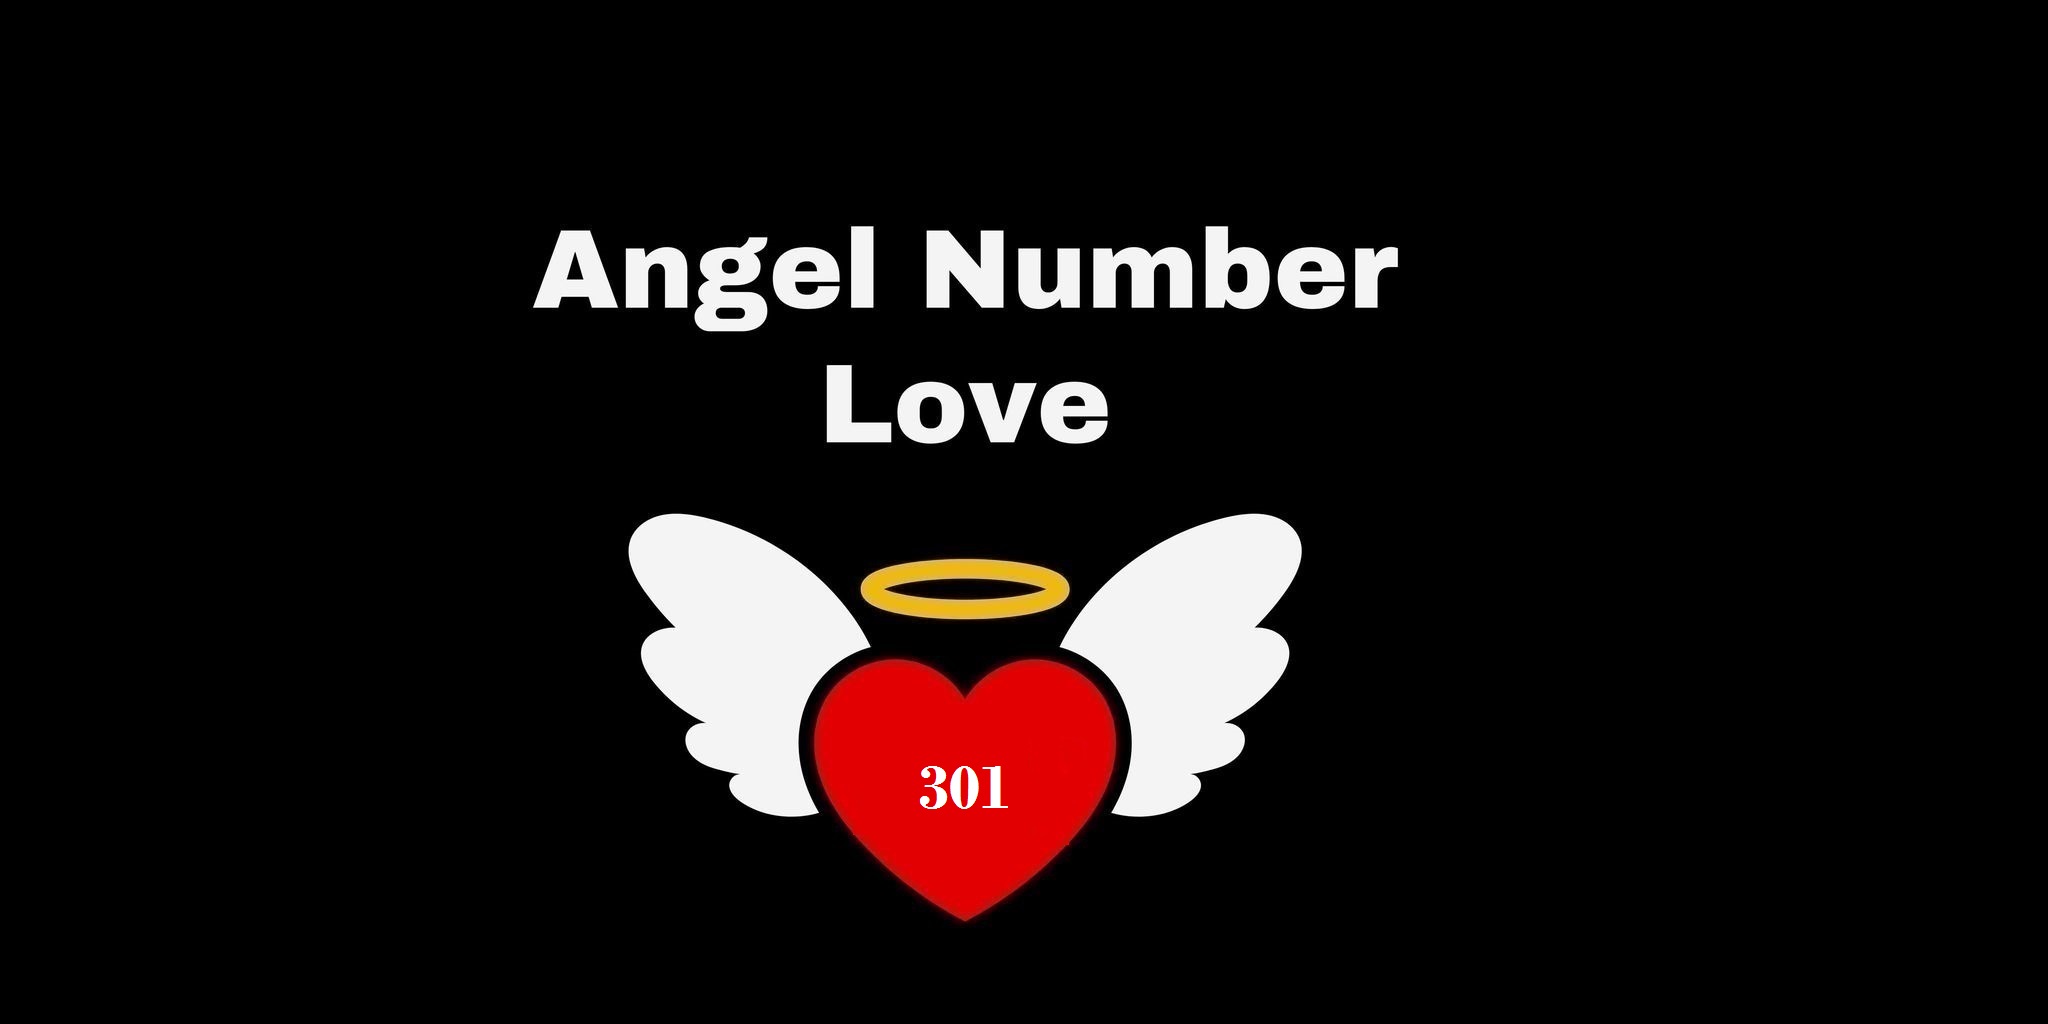 301 Angel Number Meaning In Love